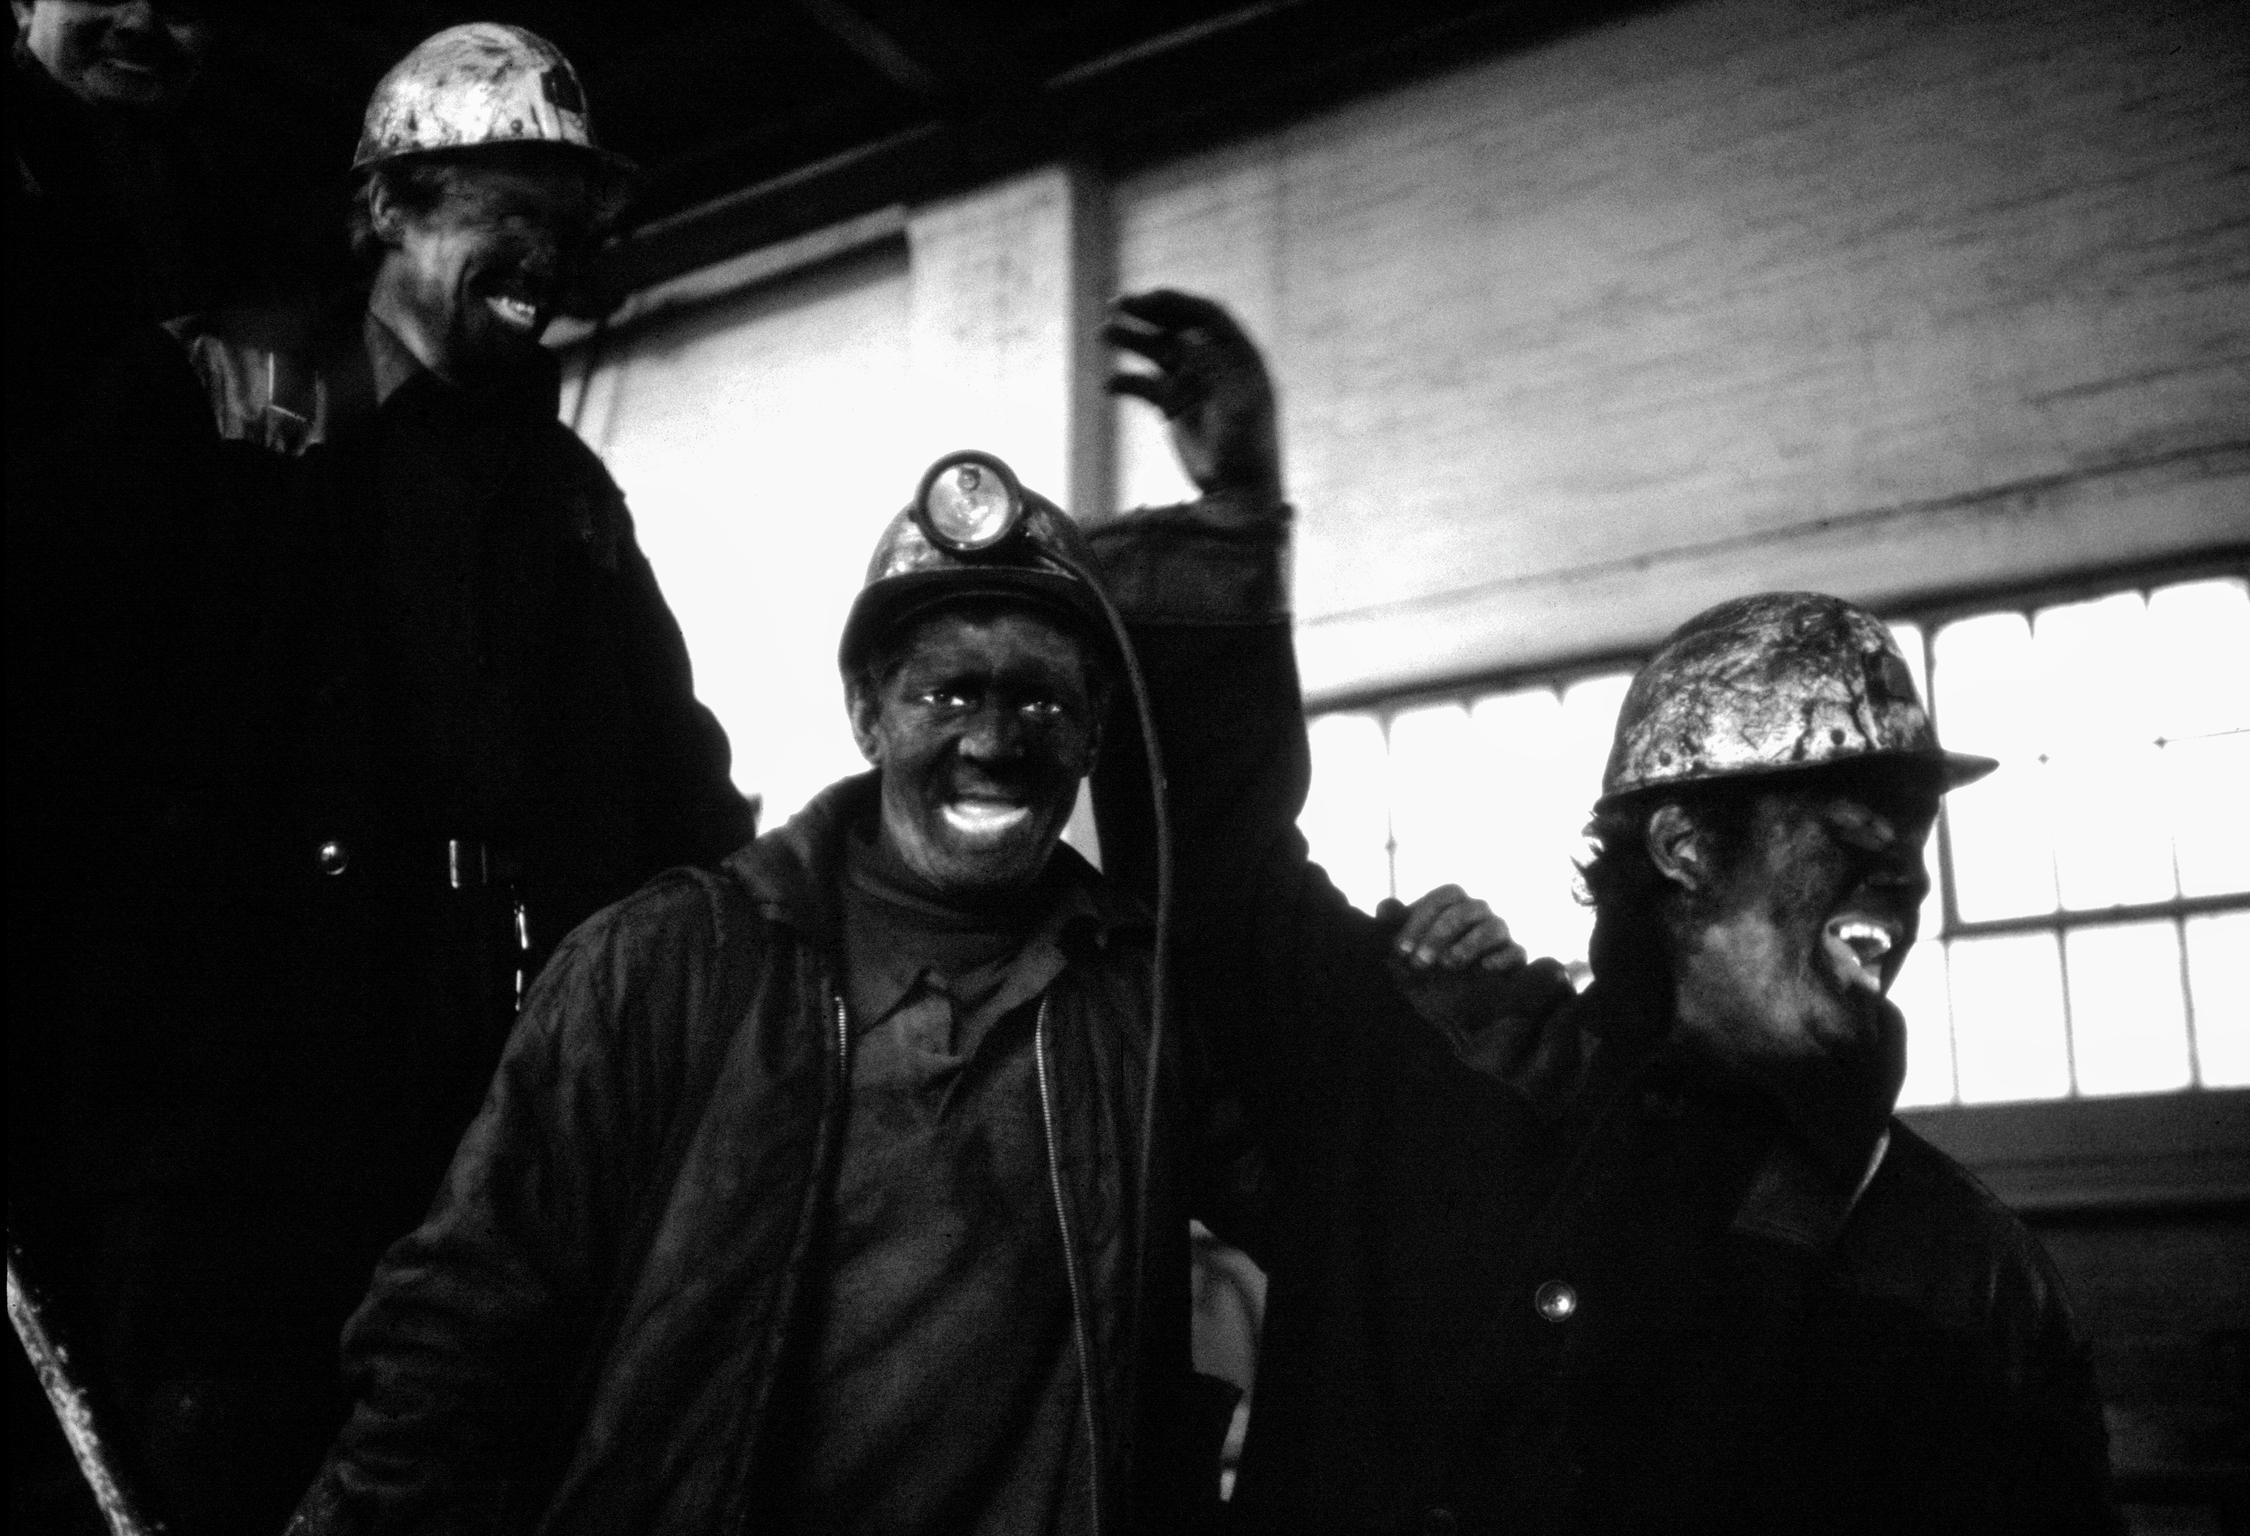 Miners at the end of their shift. Rhondda Valley, Wales